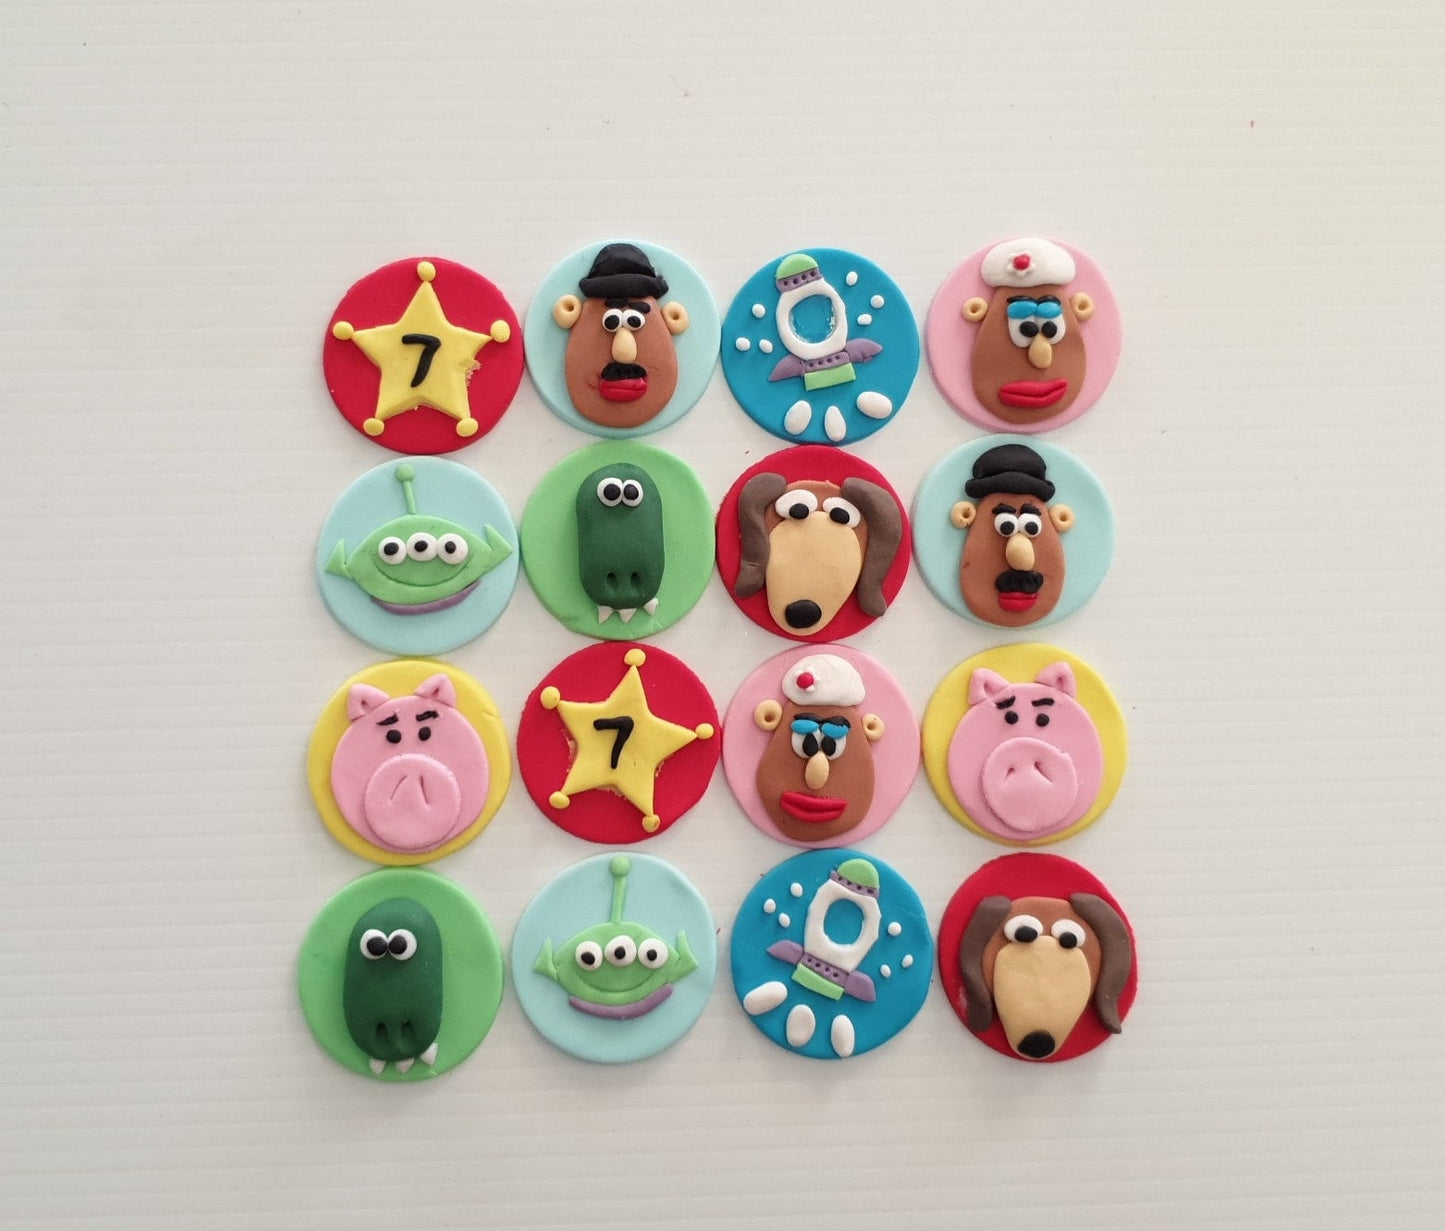 Toy Story cupcake toppers hand made edible fondant cake decorations